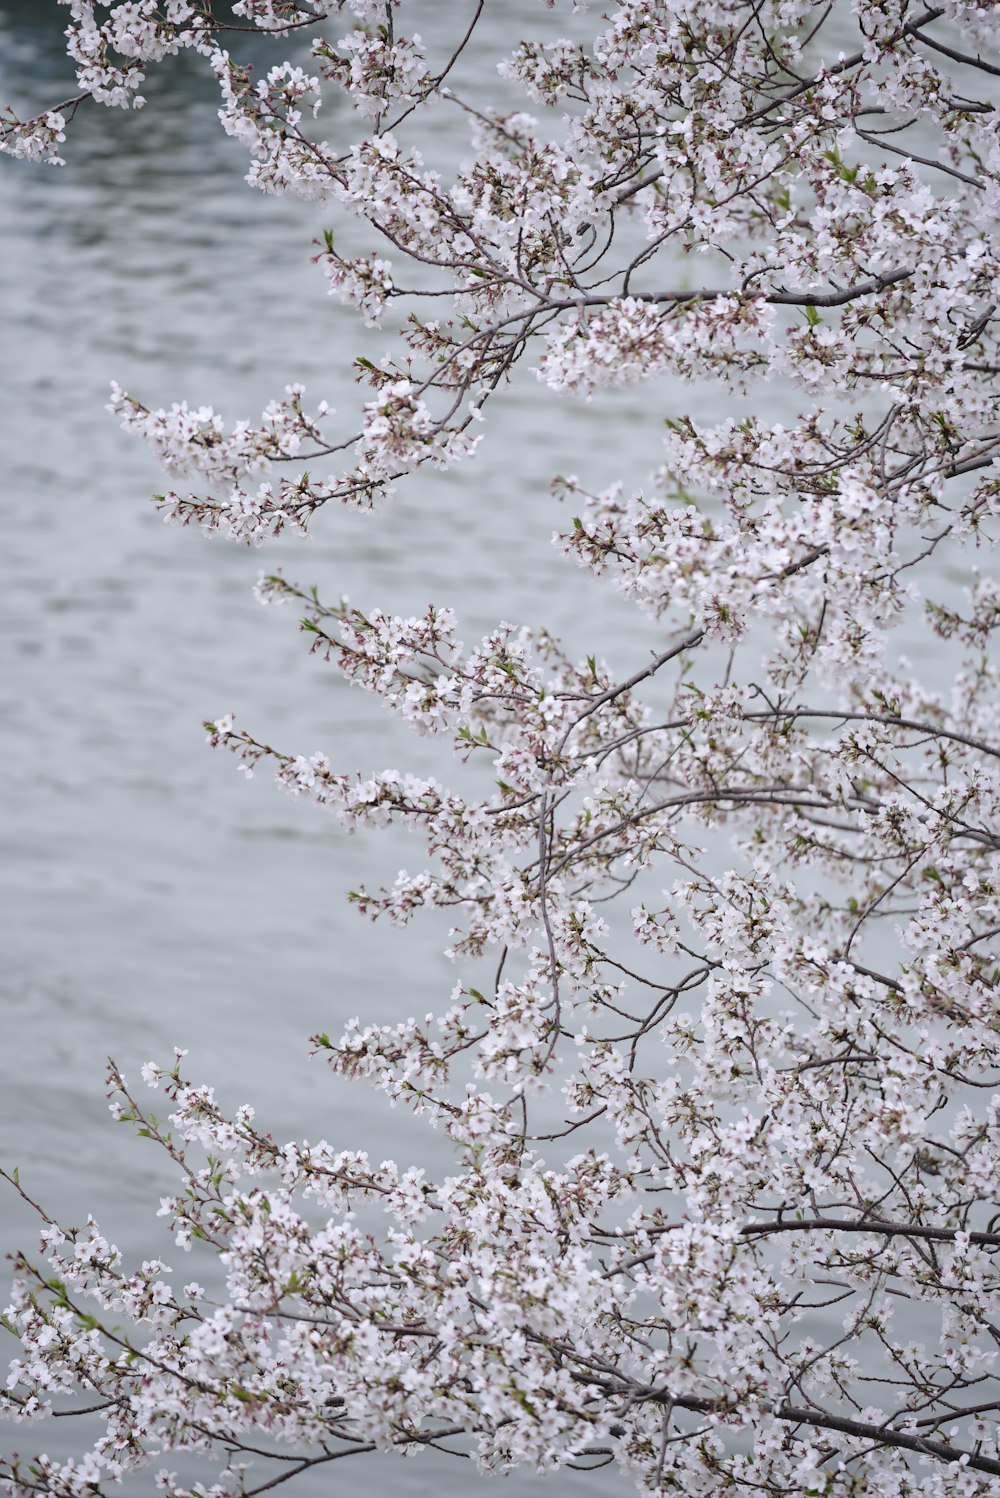 a tree with white flowers next to a body of water